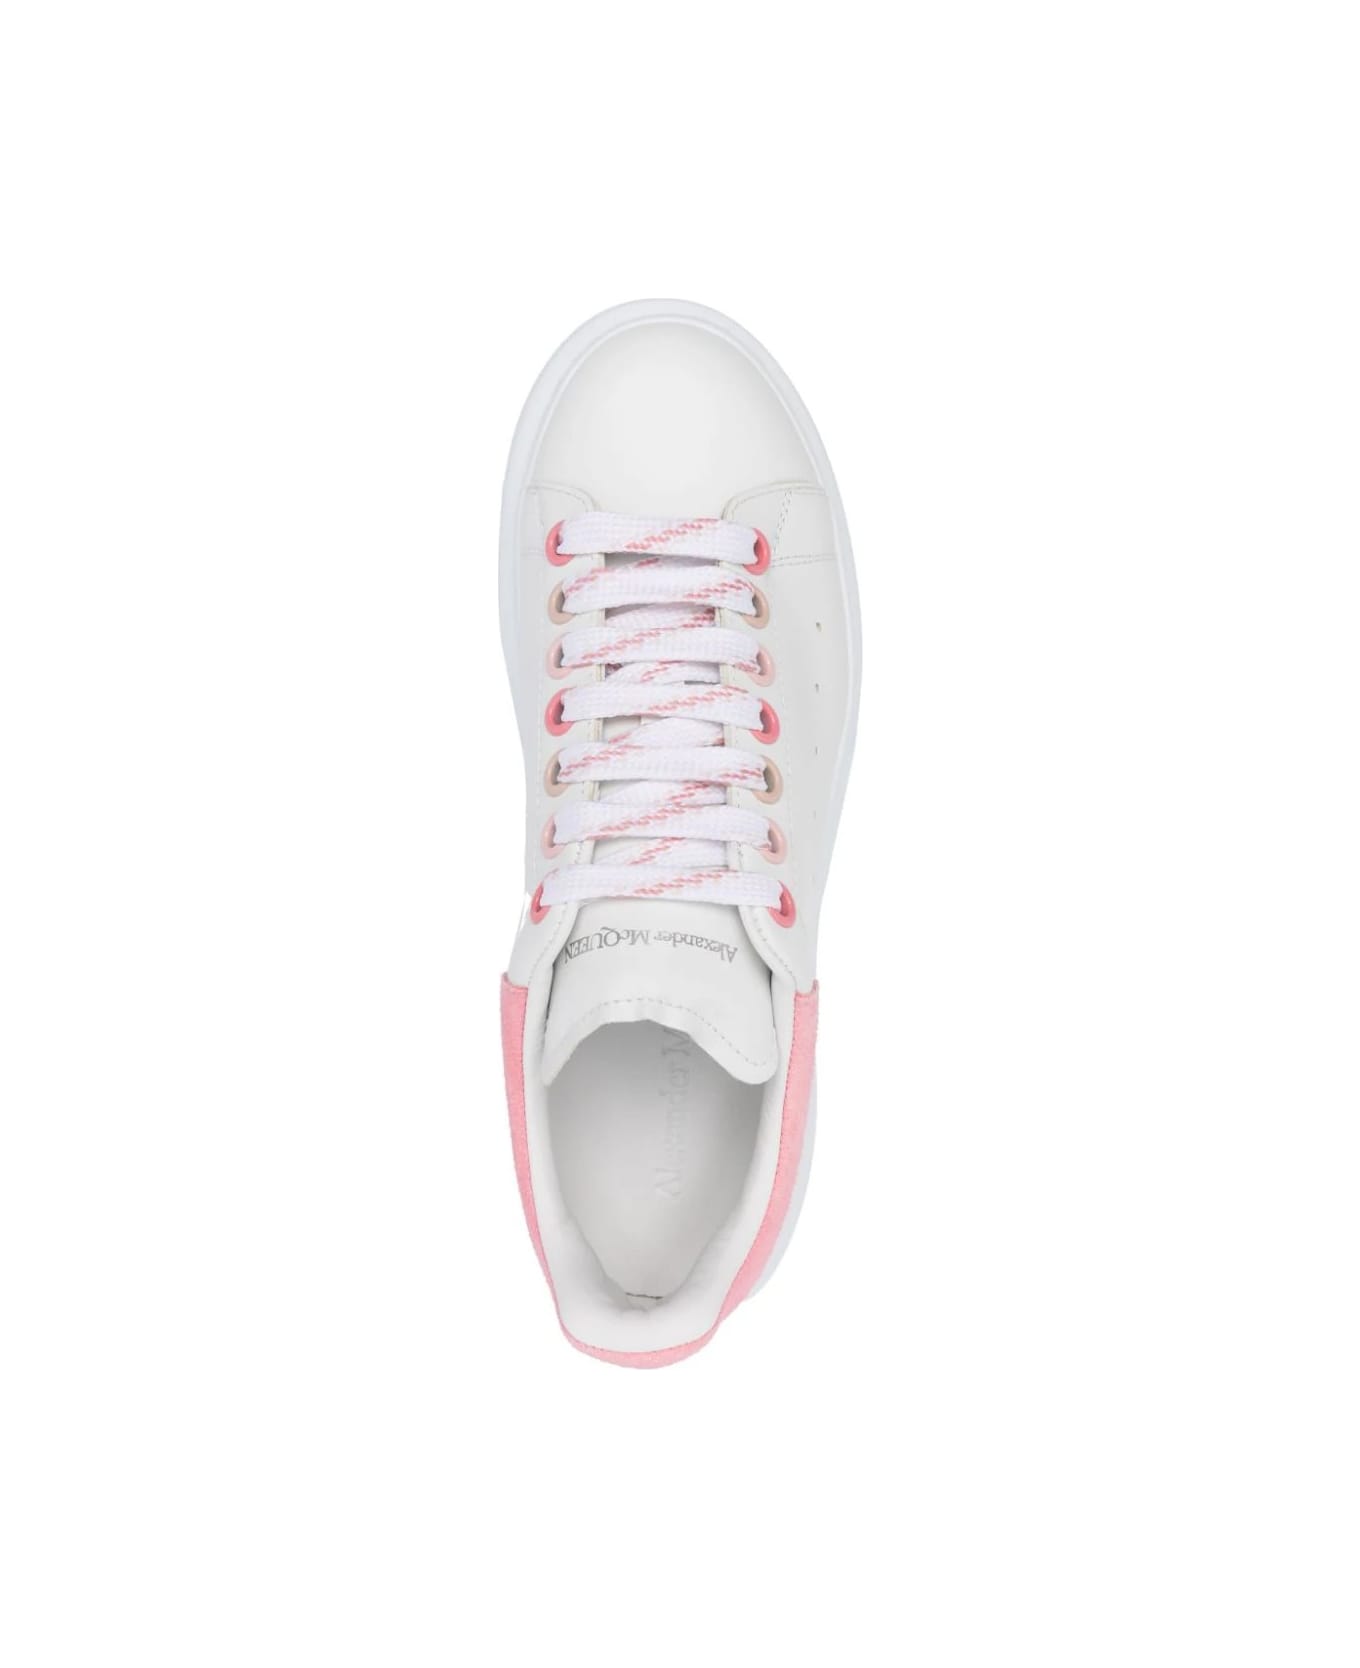 Alexander McQueen White Oversized Sneakers With Pink And Multicolour Details - White